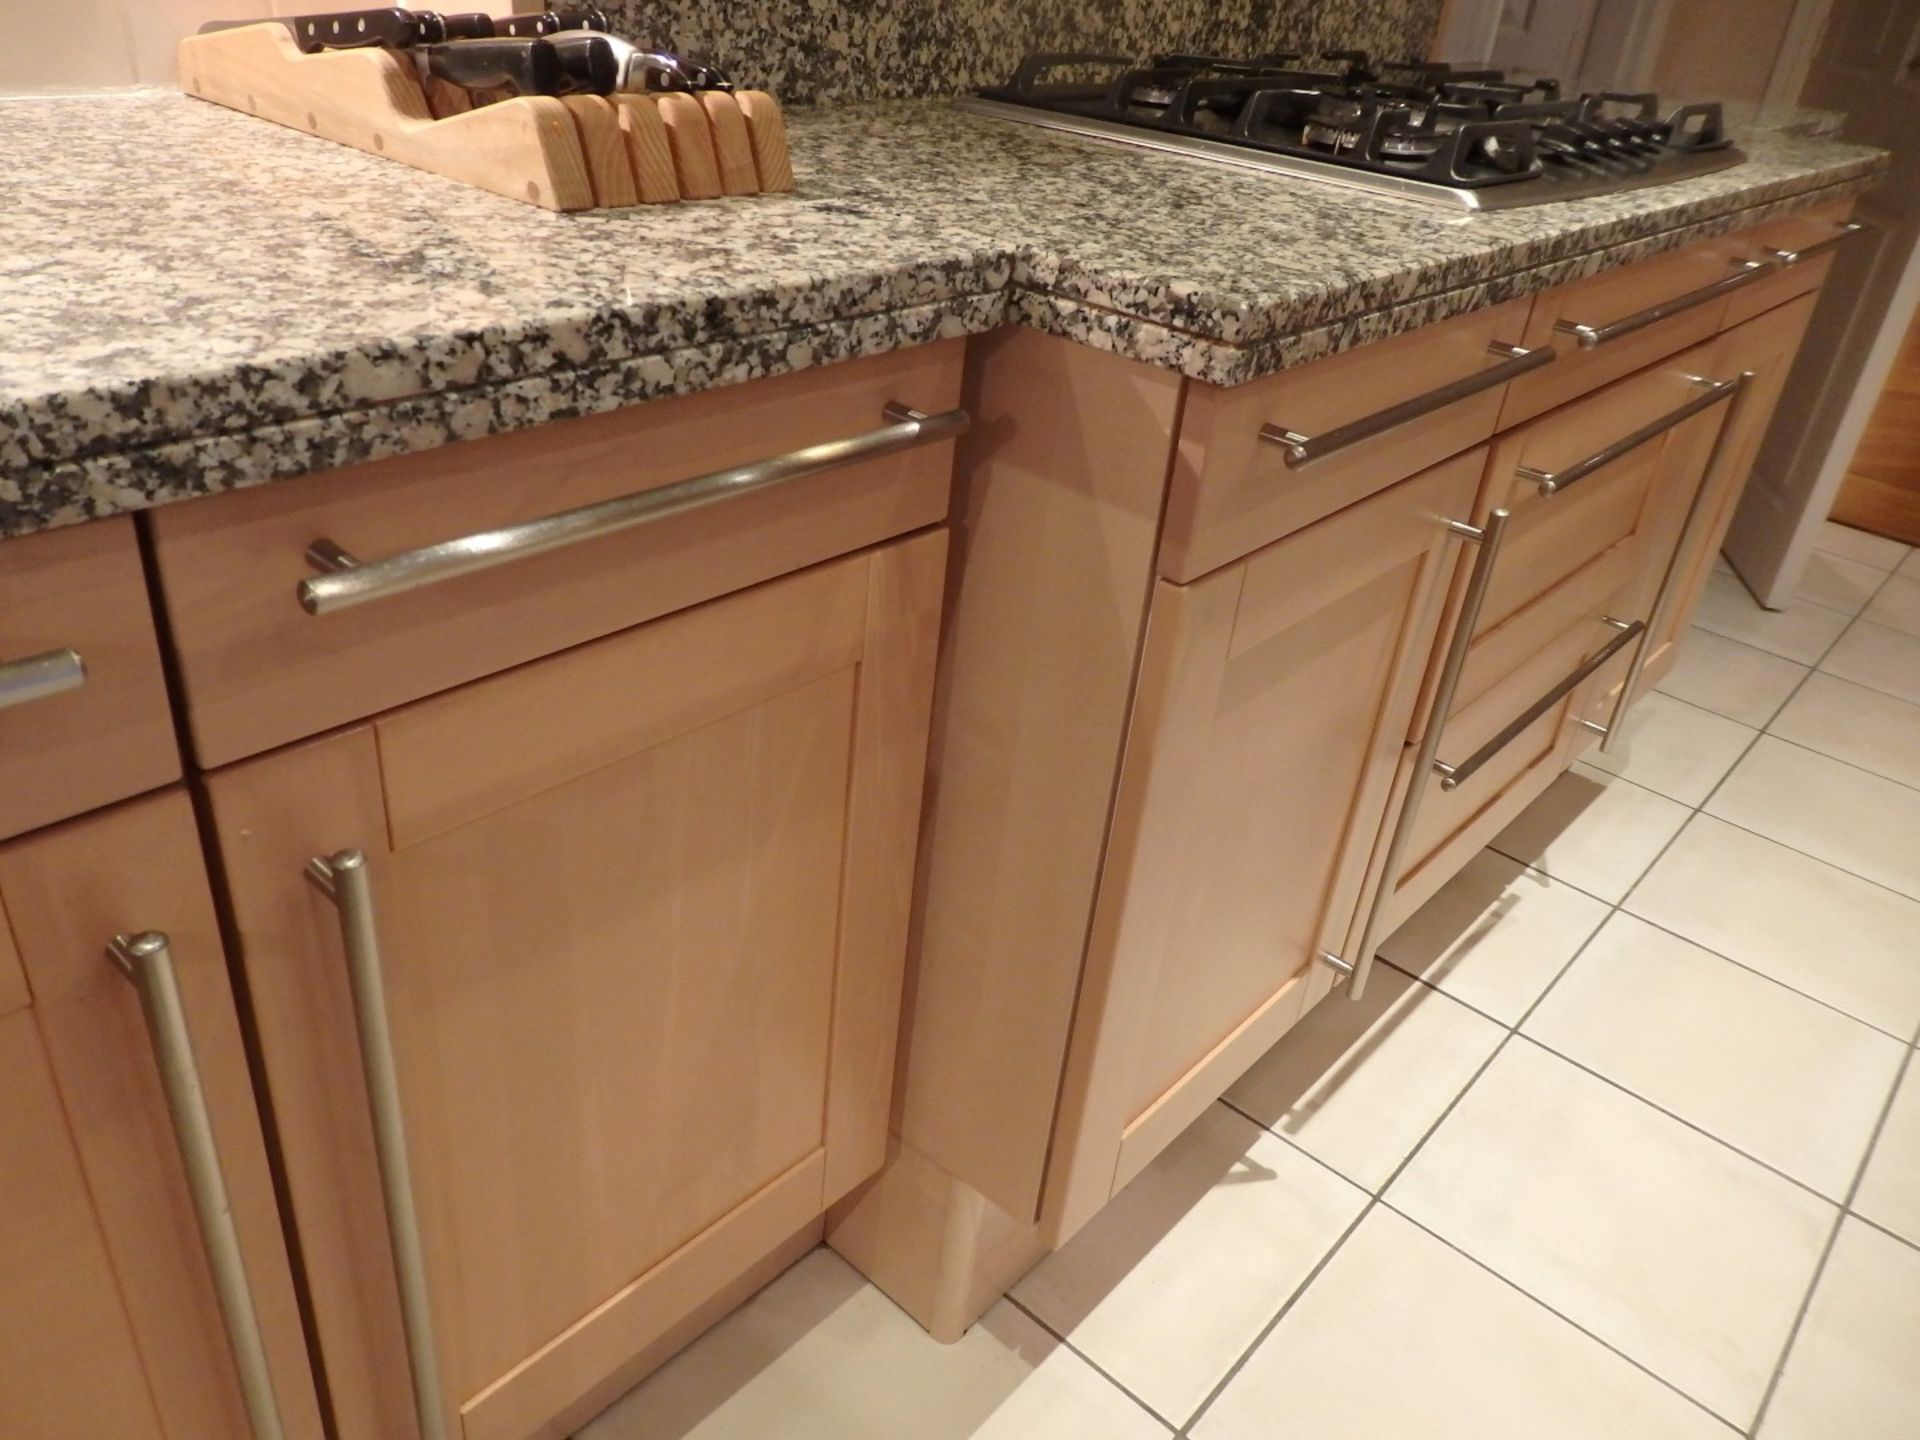 1 x Siematic Fitted Kitchen With Beech Shaker Style Doors, Granite Worktops, Central Island and - Image 56 of 148